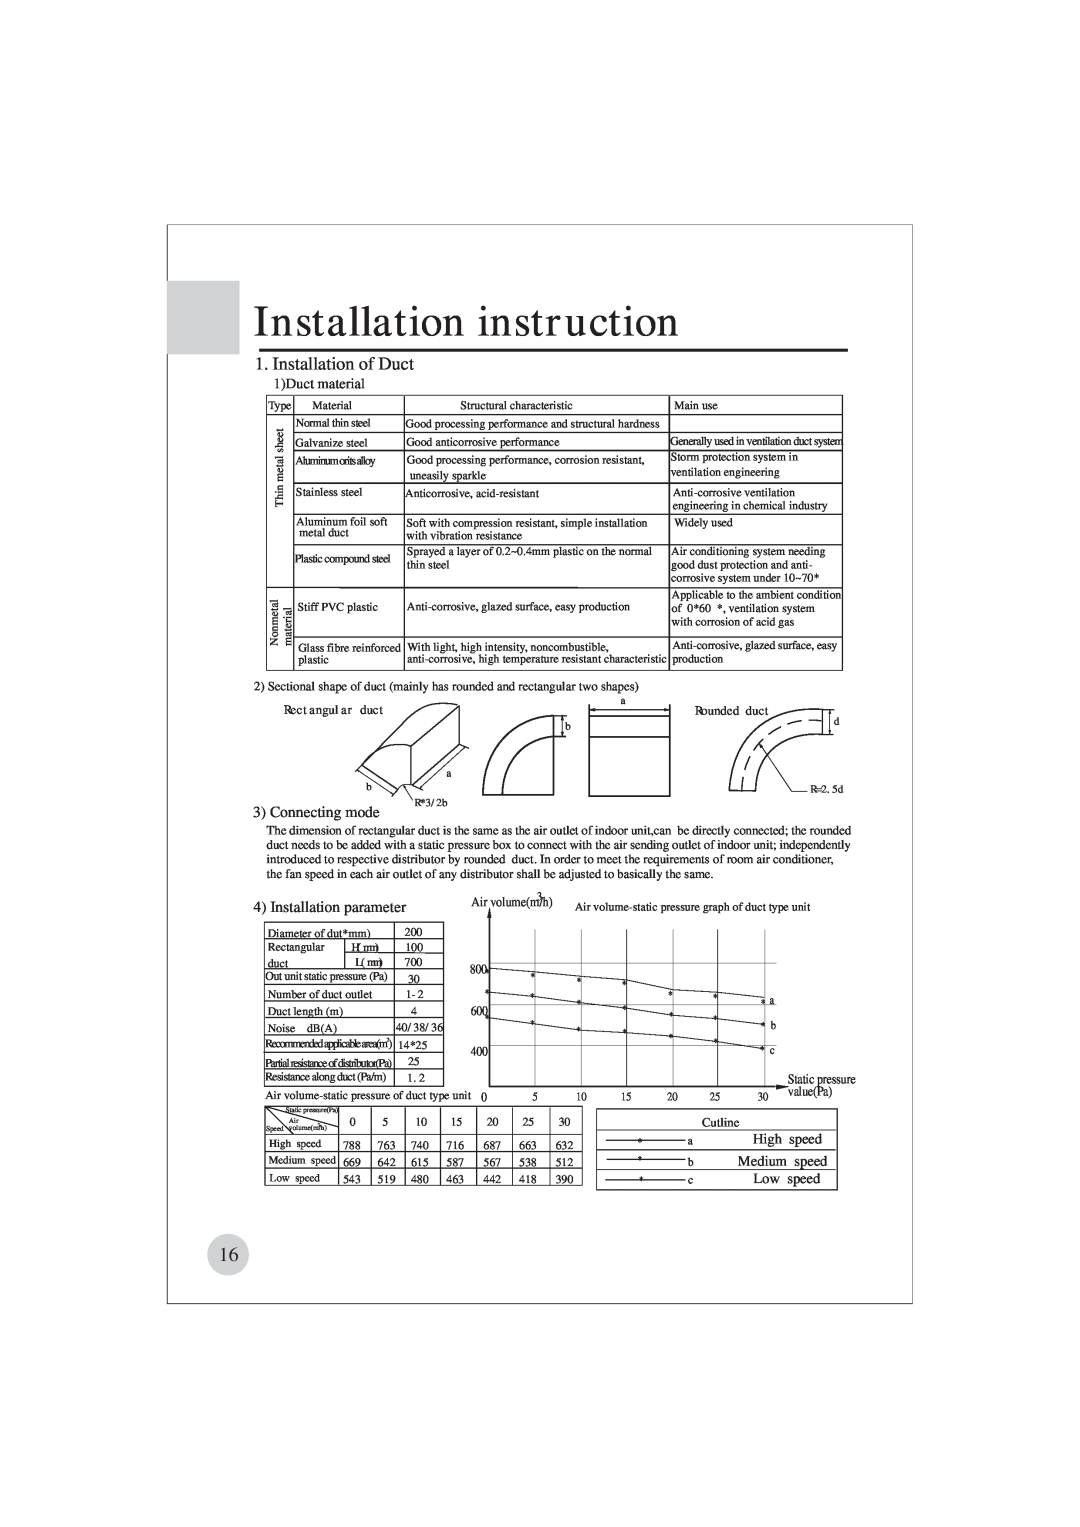 Haier AE122BCAAA (H2EM-18H03) Installation instruction, Installation of Duct, 1Duct material, Connecting mode, High speed 